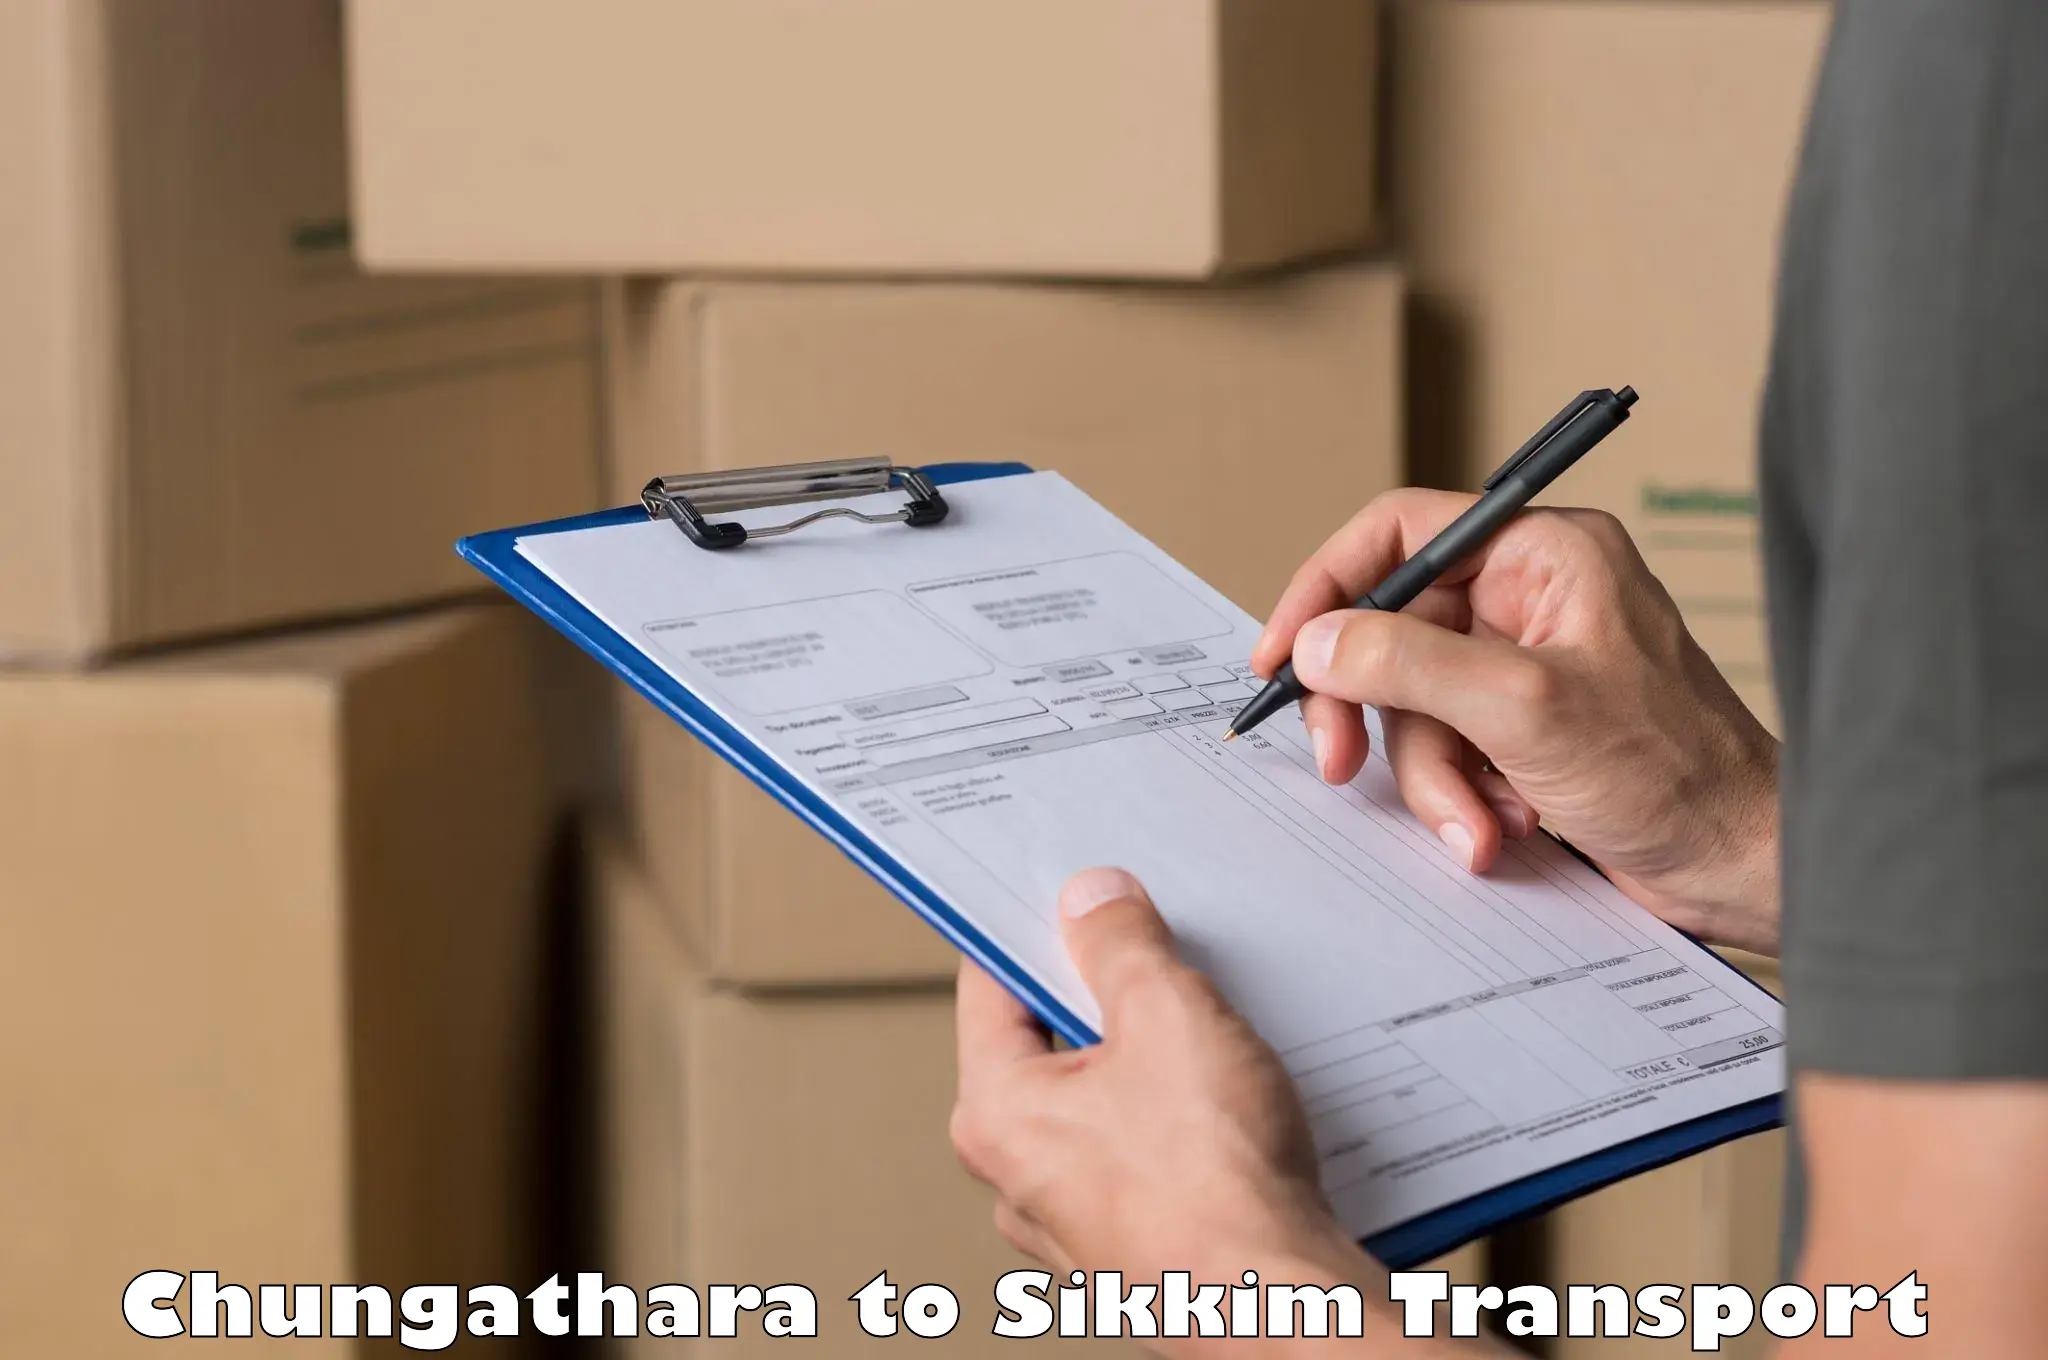 Container transport service Chungathara to Rangpo